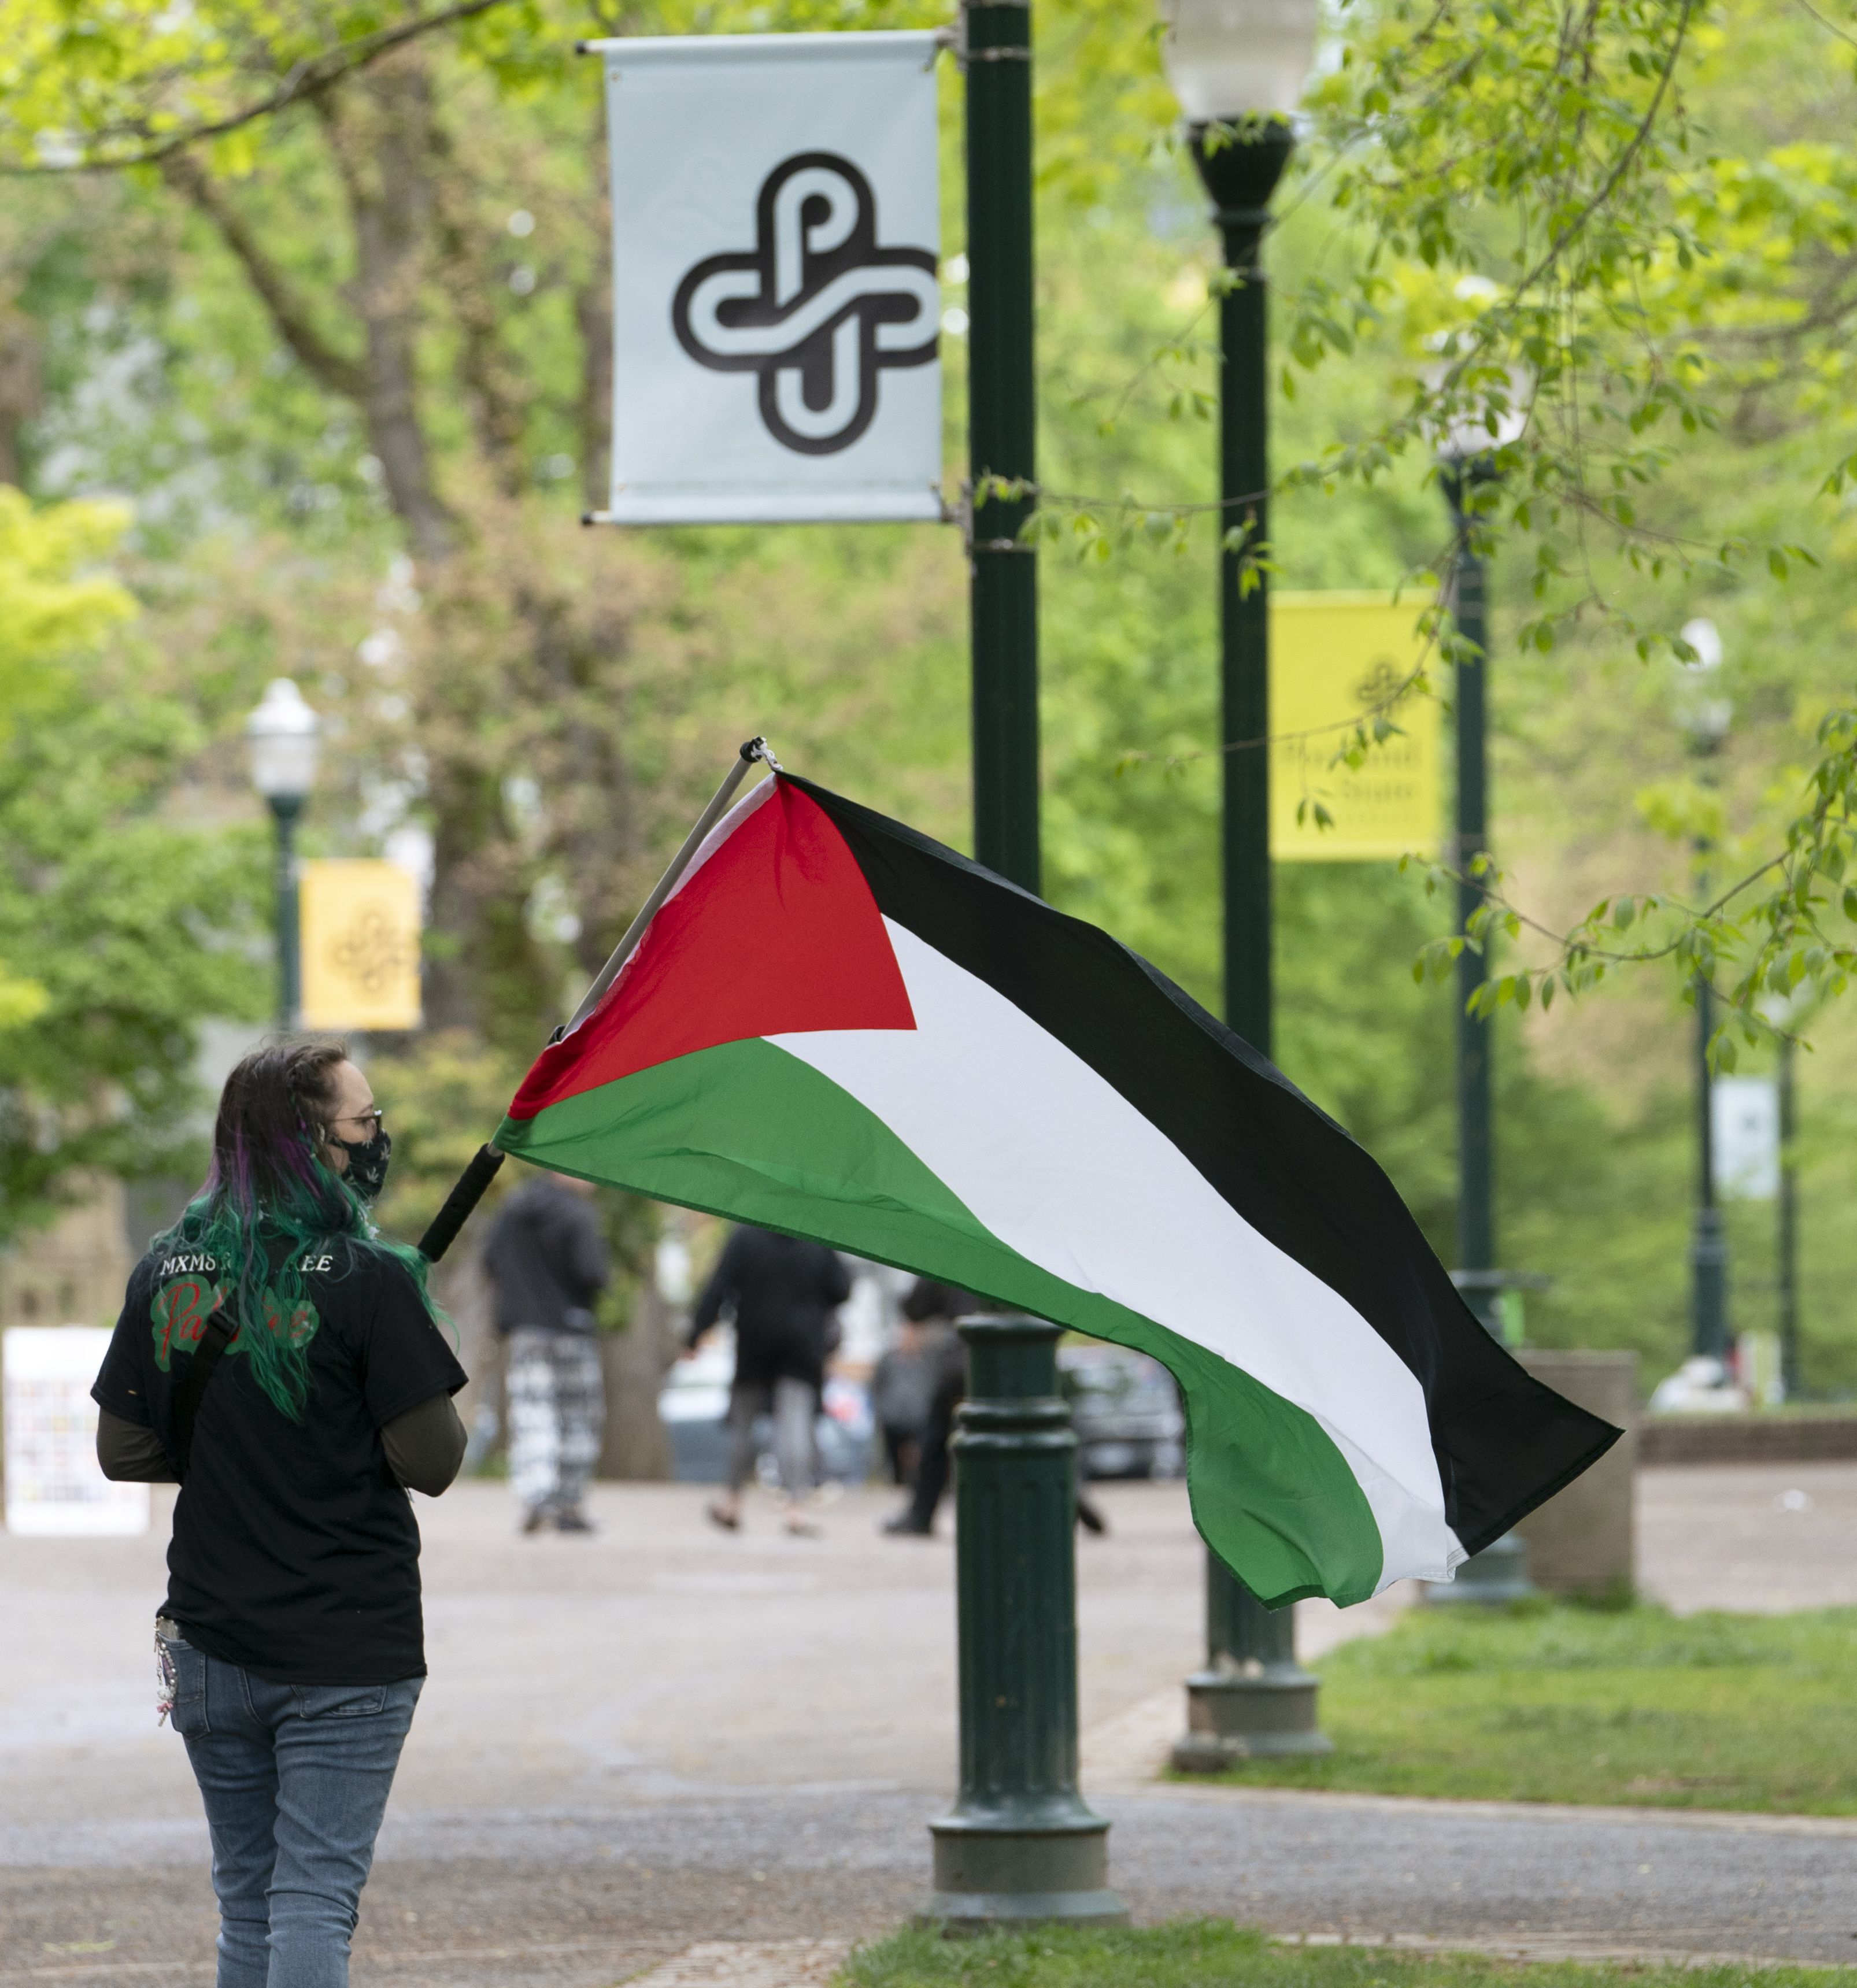 A protester carries a flag in Portland State Univeristy’s South Park Blocks, April 26, 2024. Protesters in support of Palestinians in Gaza and in protest of Portland State University’s ties with companies that have contracts with Israel, set up tents and barricades on Thursday and were removed by police after several hours. Police warned in a statement Friday morning that anybody occupying a closed park, engaging in violent activity, or destroying property could be arrested.